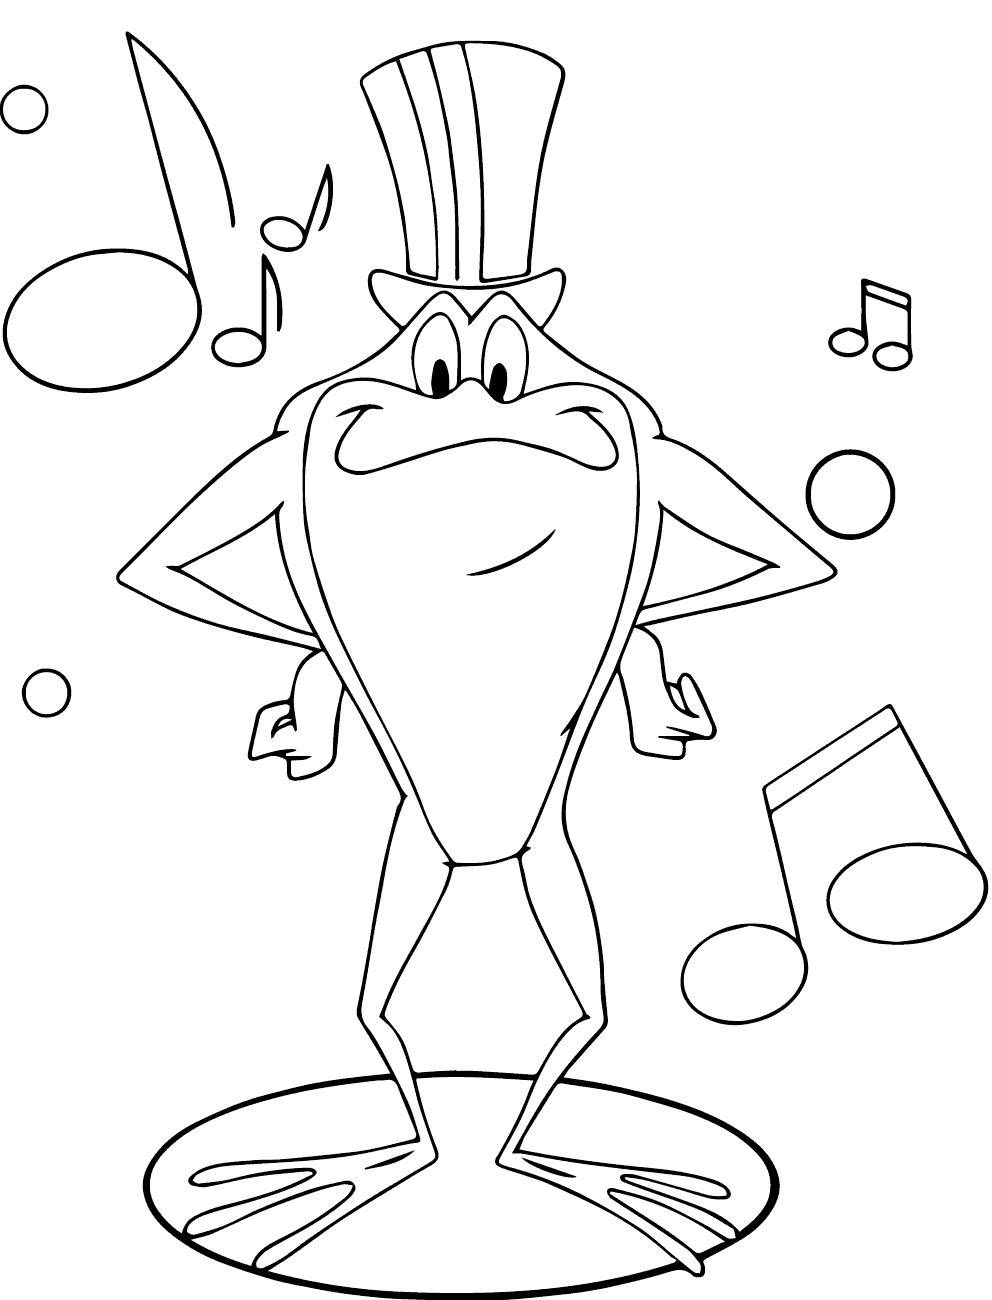 Michigan J. Frog Coloring Pages